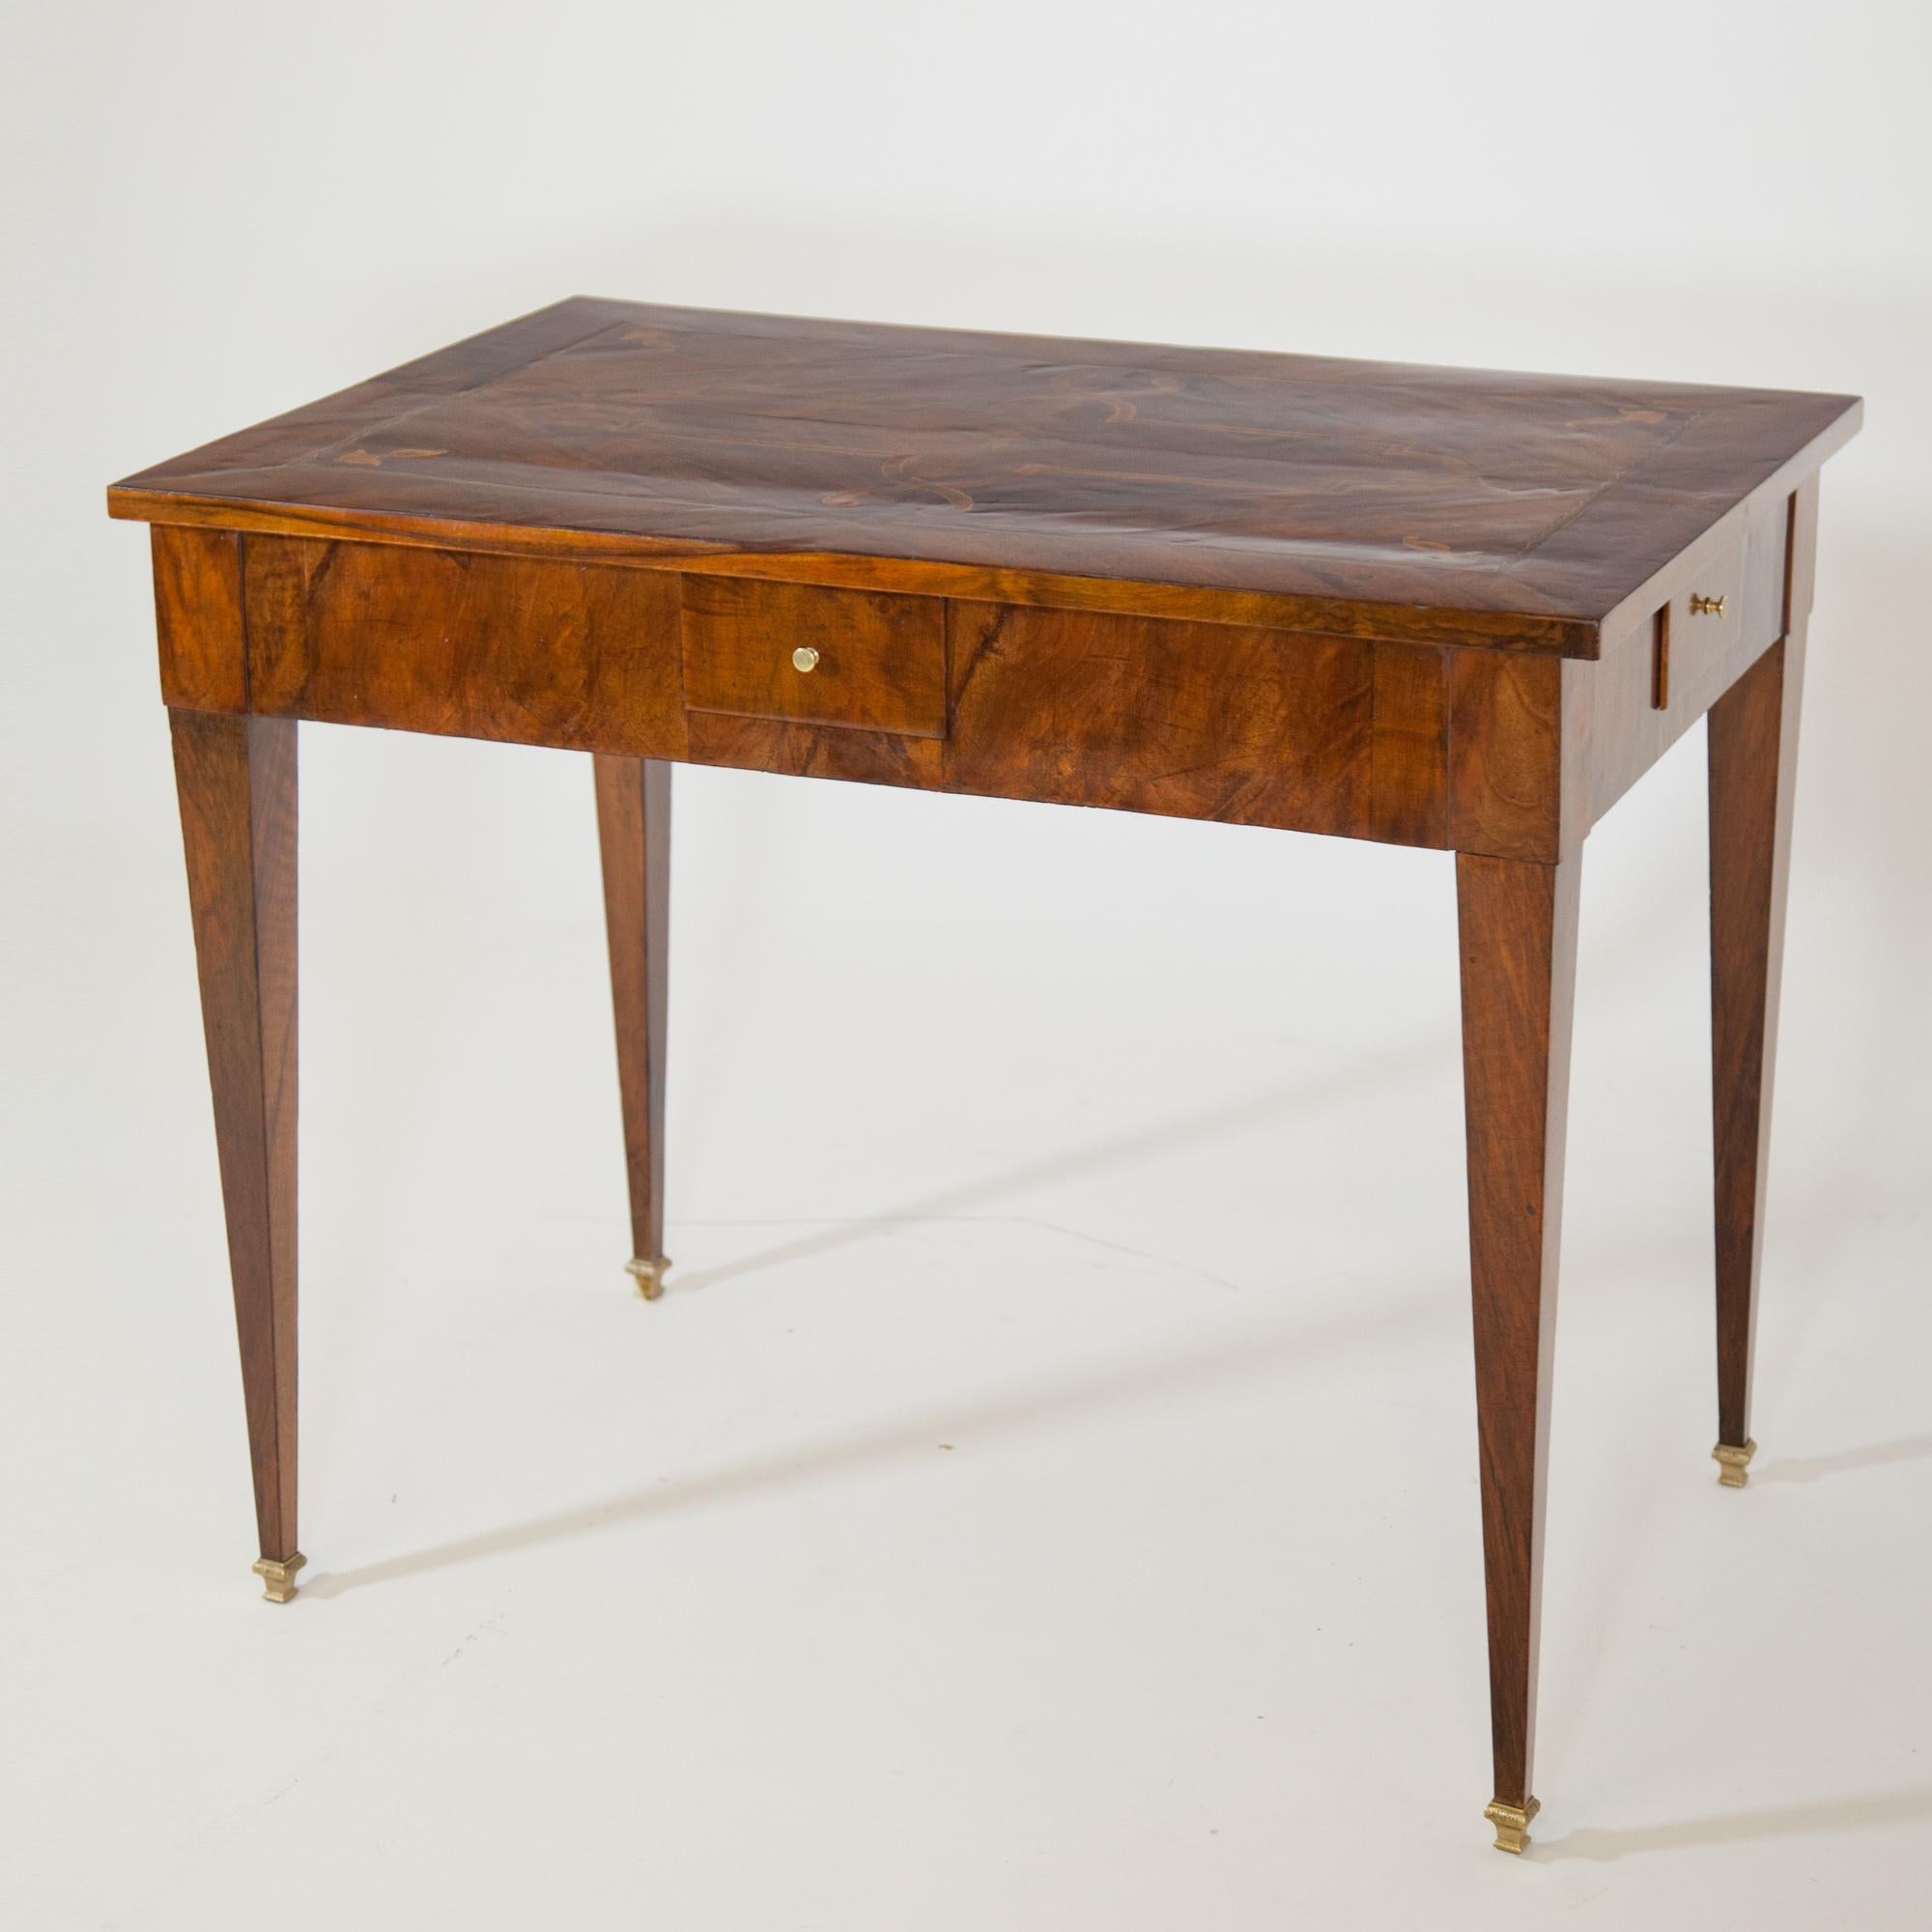 Square table standing on tall tapered legs with bronze sabots and drawers on each side. The table top is veneered with strapwork and small ornaments in the corners and framed with a fillet ribbon. Walnut veneered.